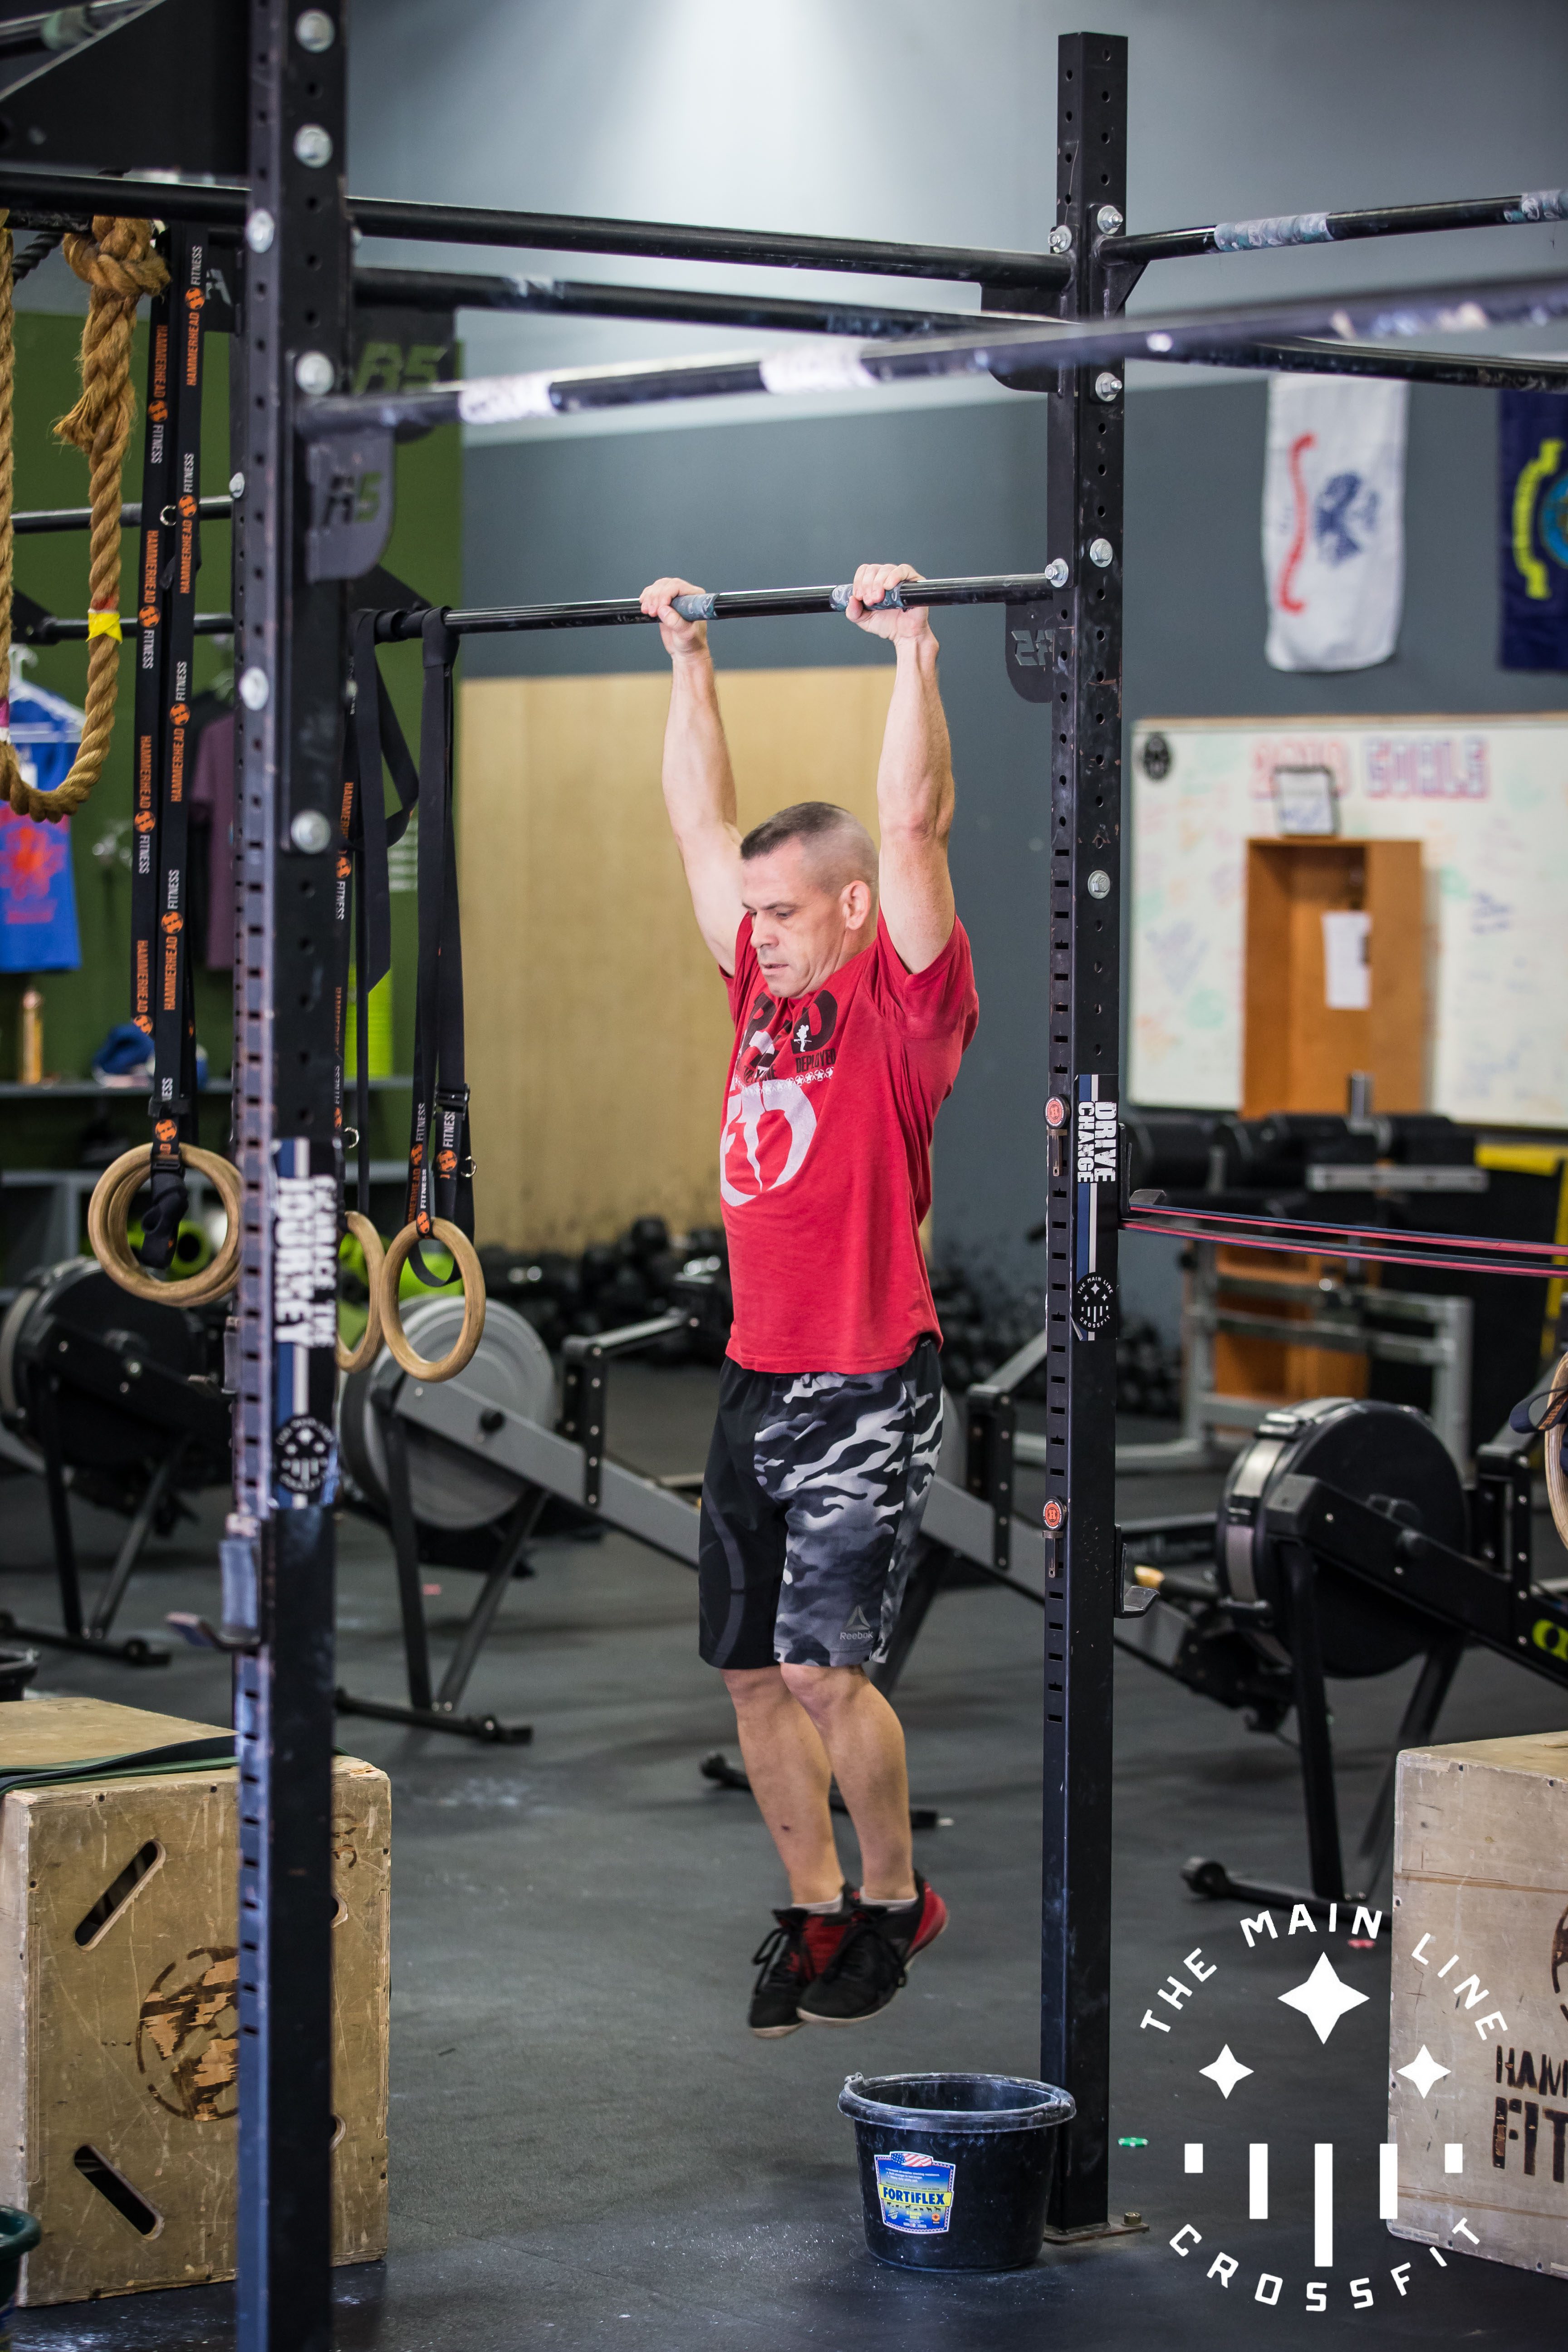 Tuesday 11.13.18 CrossFit